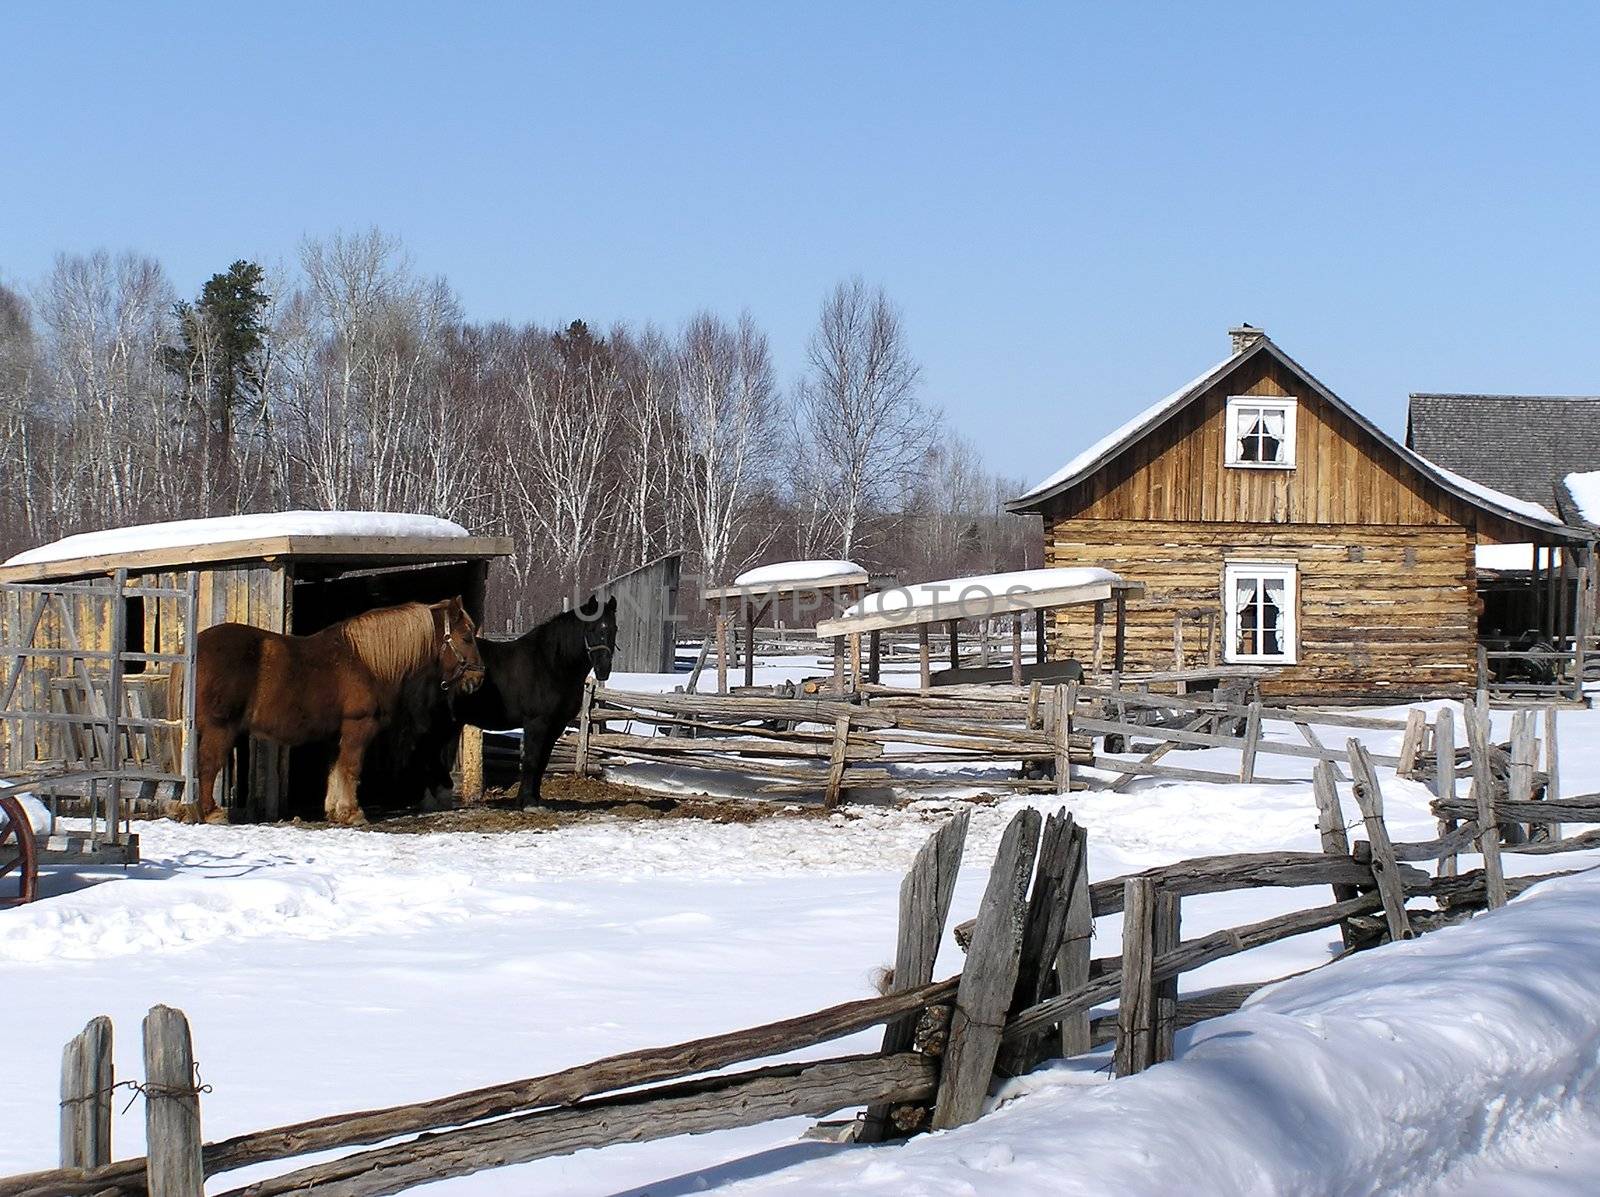 One hundred year old farm house with two working horse, fence and barn on a sunny winter day.